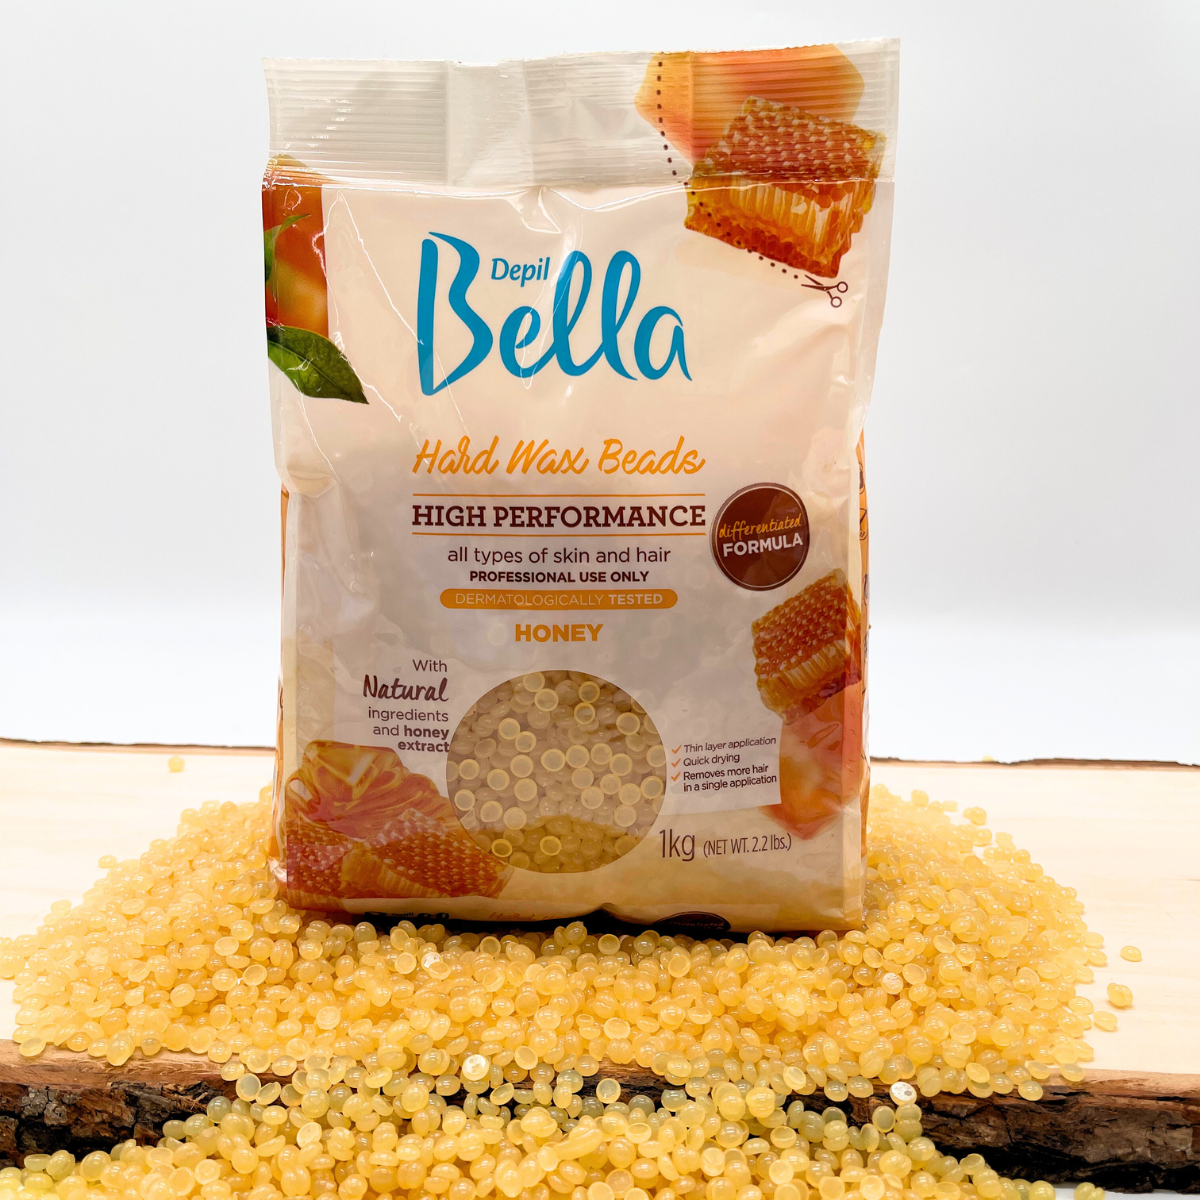 Applying Depil Bella Honey Wax for professional hair removal.